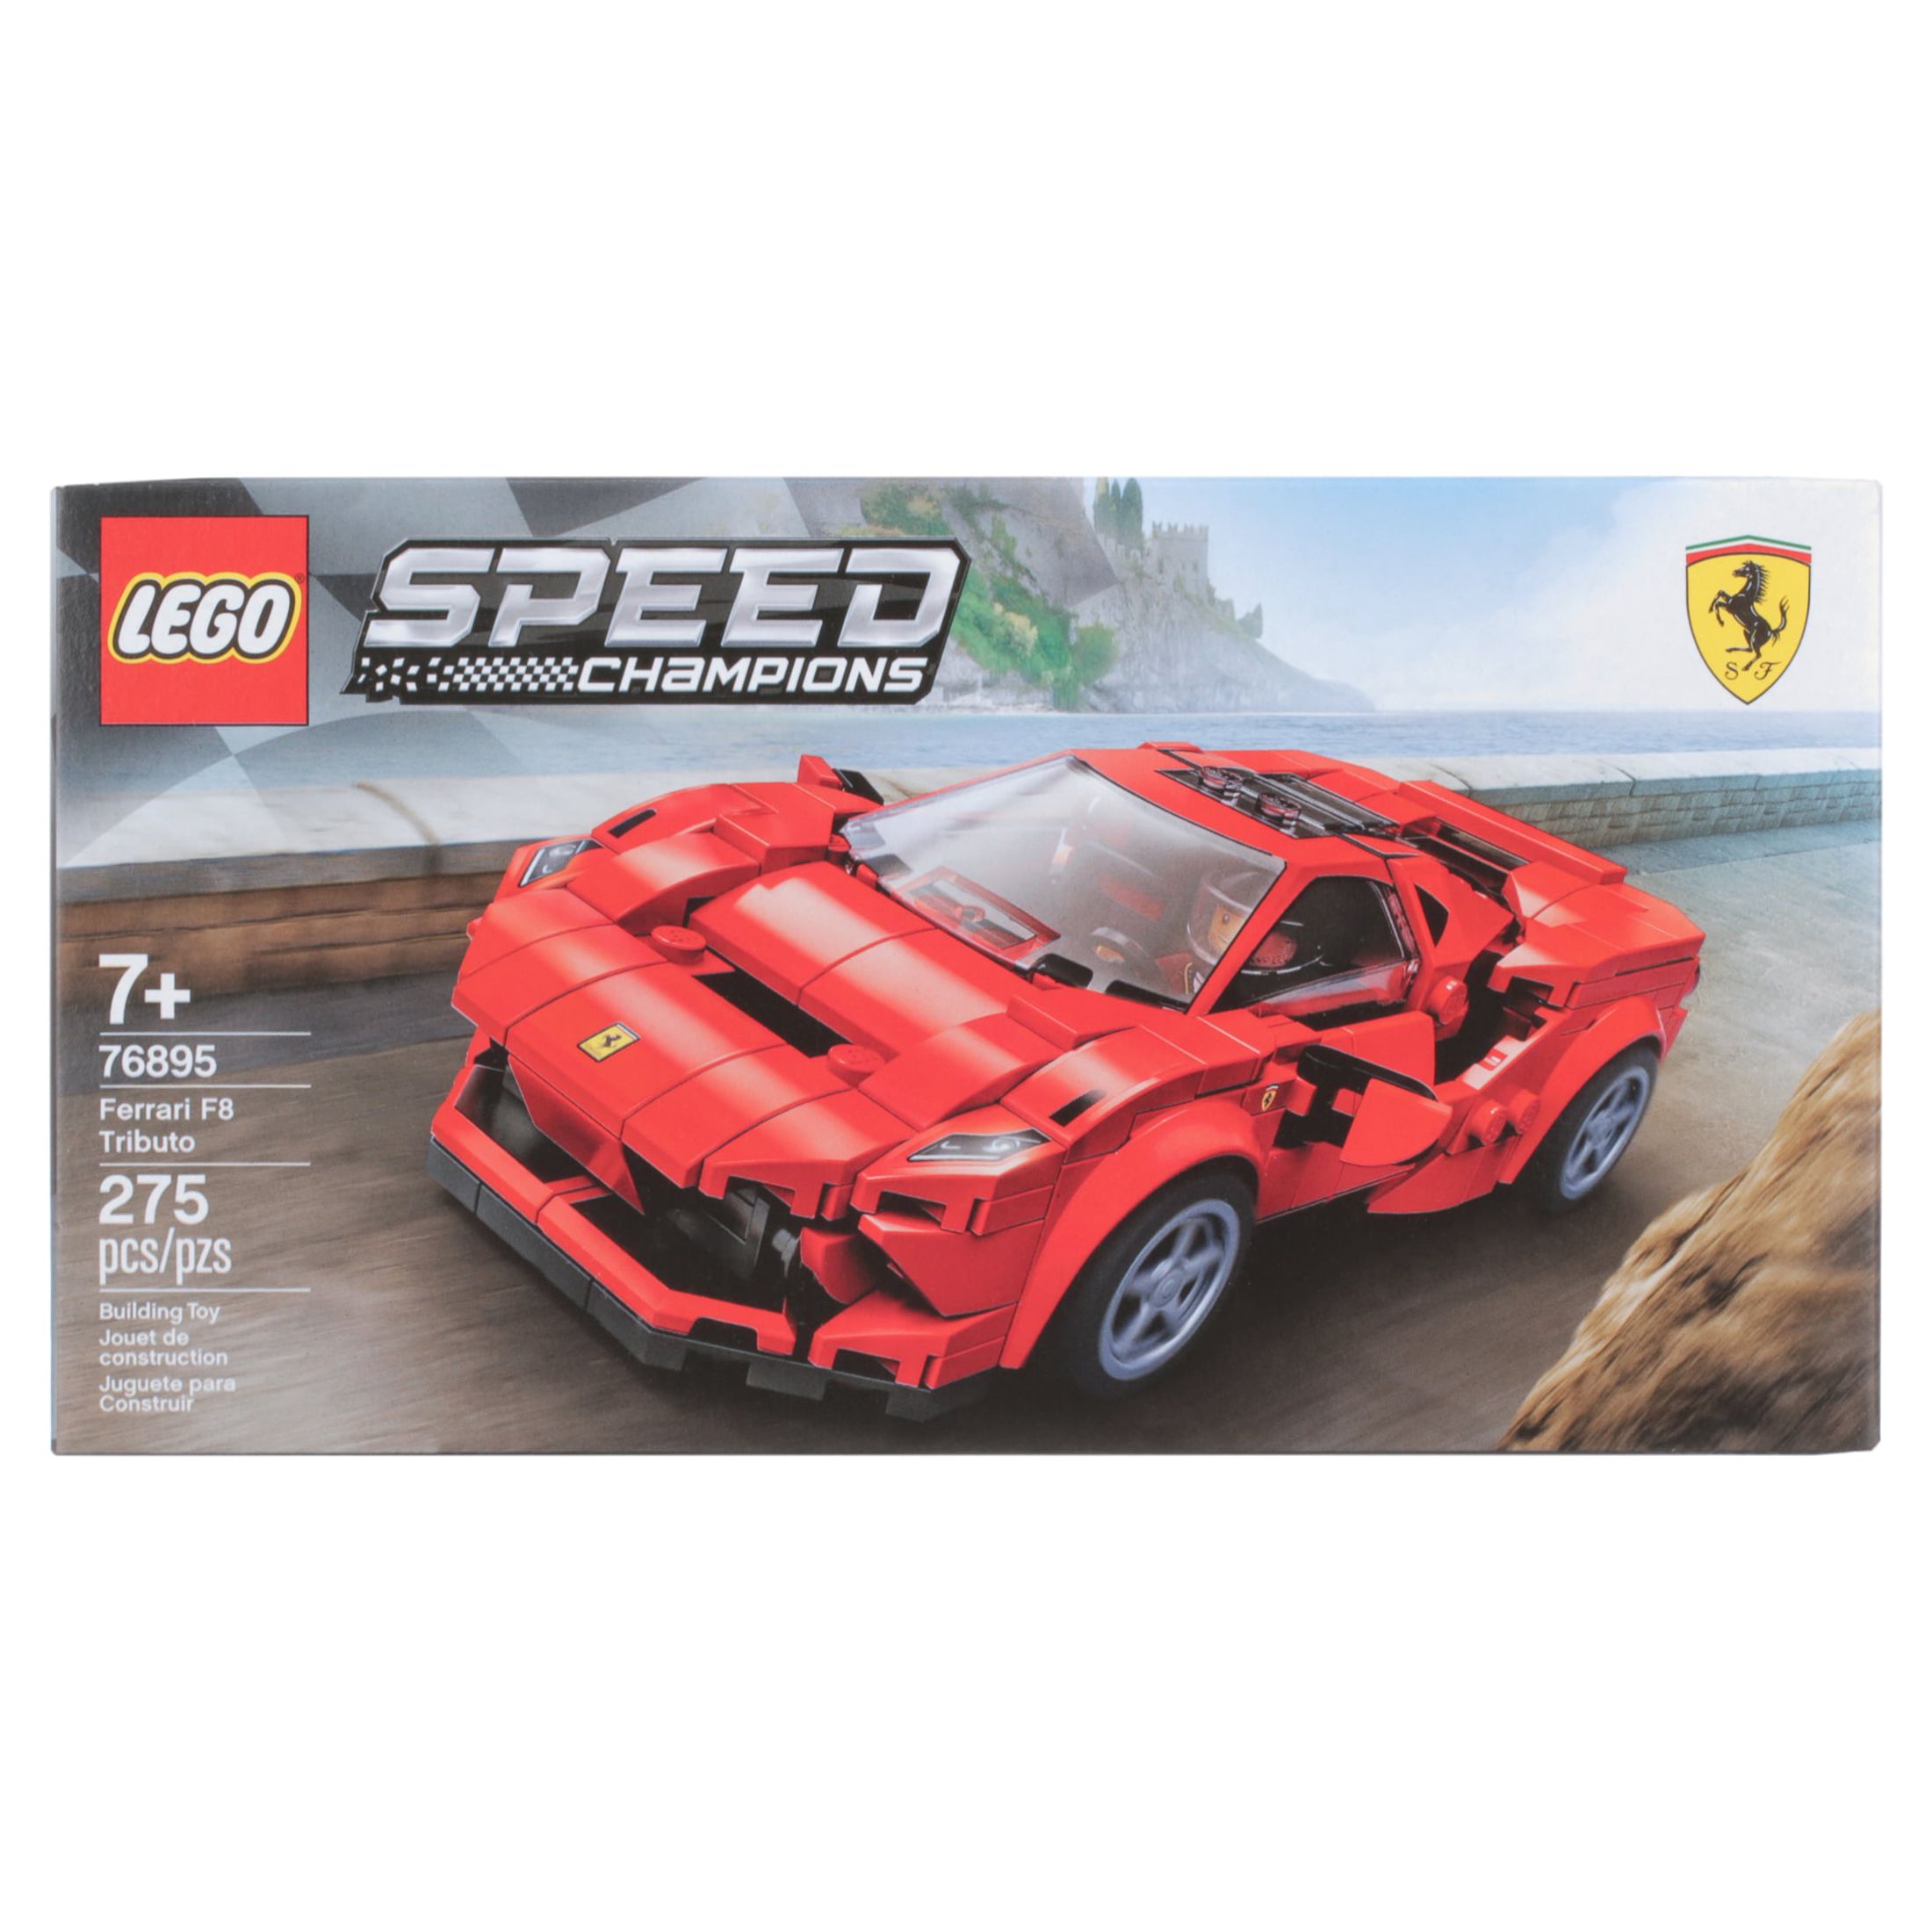 LEGO Speed Champions 76895 Ferrari F8 Tributo Racing Model Car, Vehicle Building Car (275 pieces) - image 8 of 12